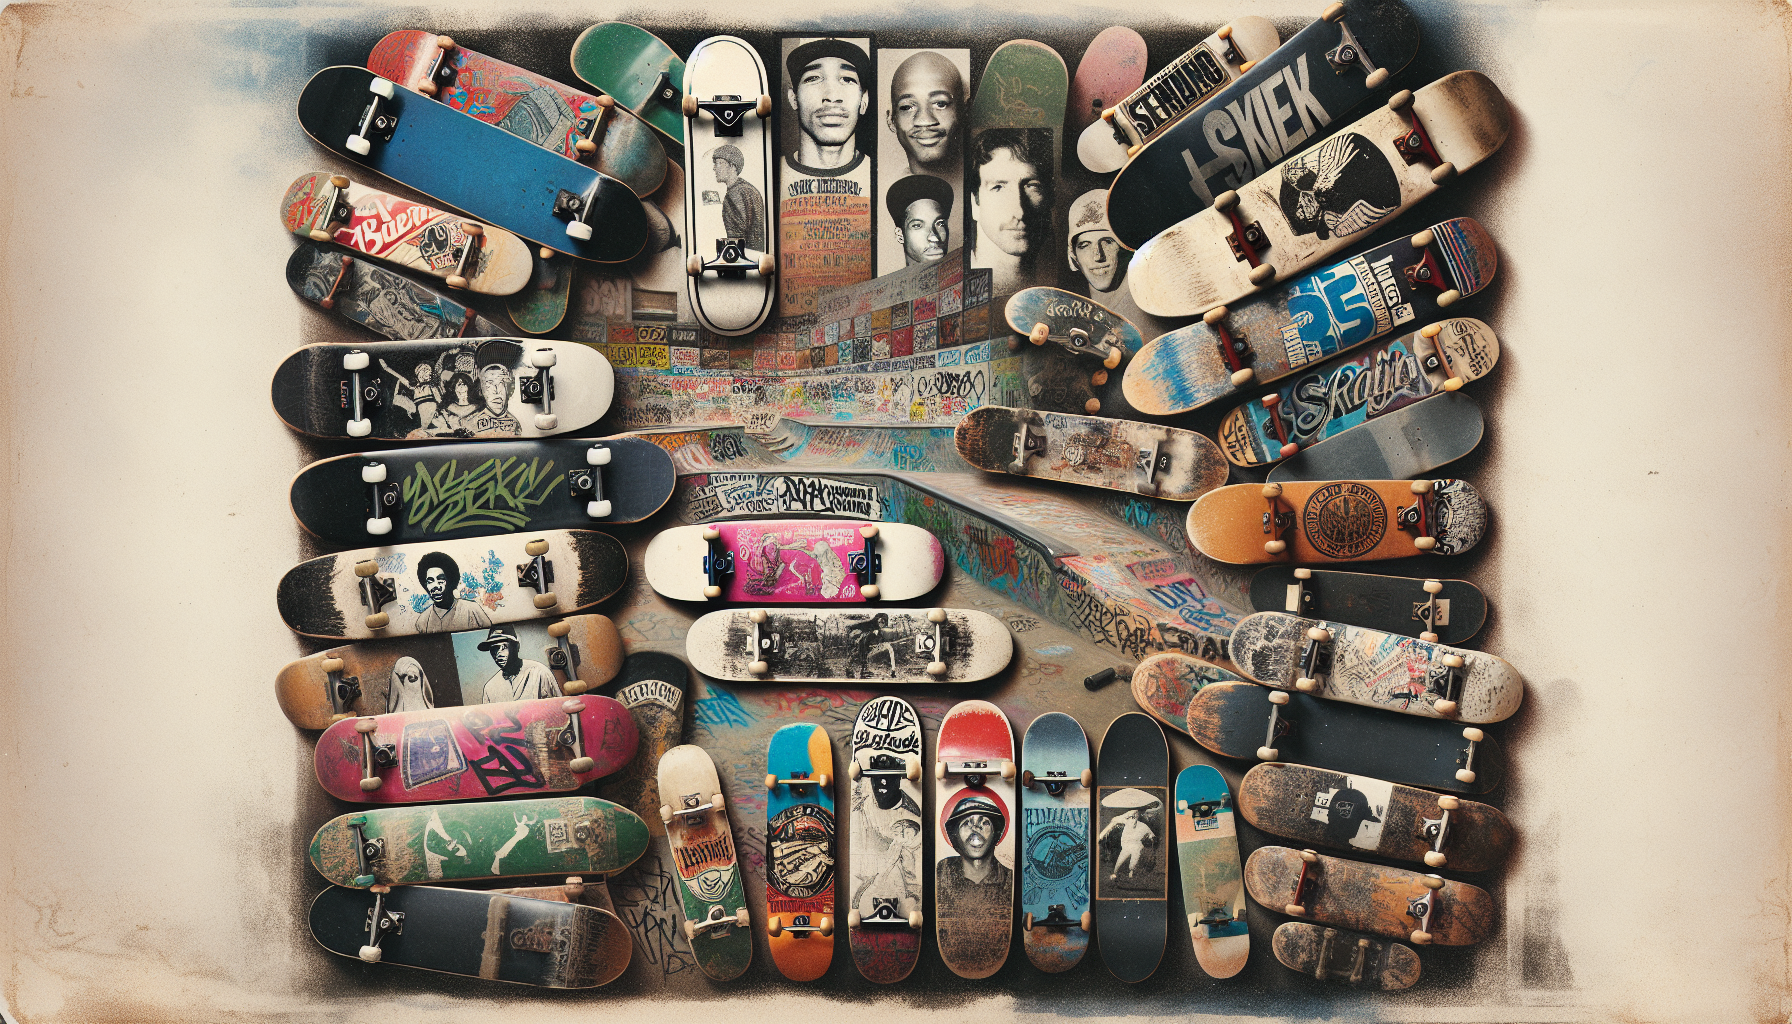 How Do You Engage With The History And Heritage Of Skateboarding For Inspiration?